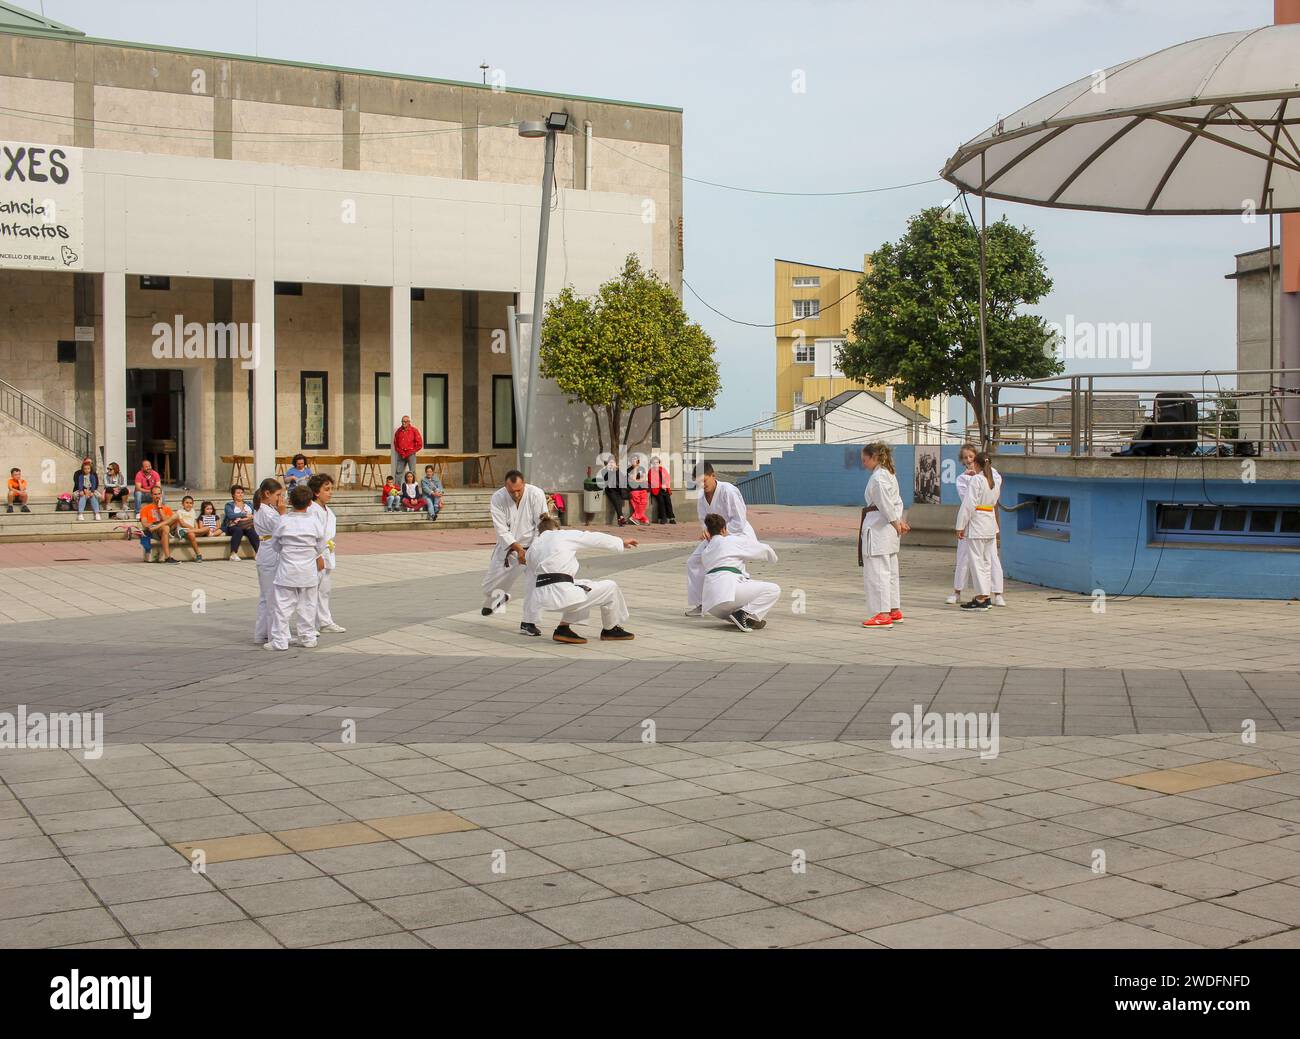 Burela, Spain - 05 05 2022: several people practicing tai jitsu in a square to promote it Stock Photo